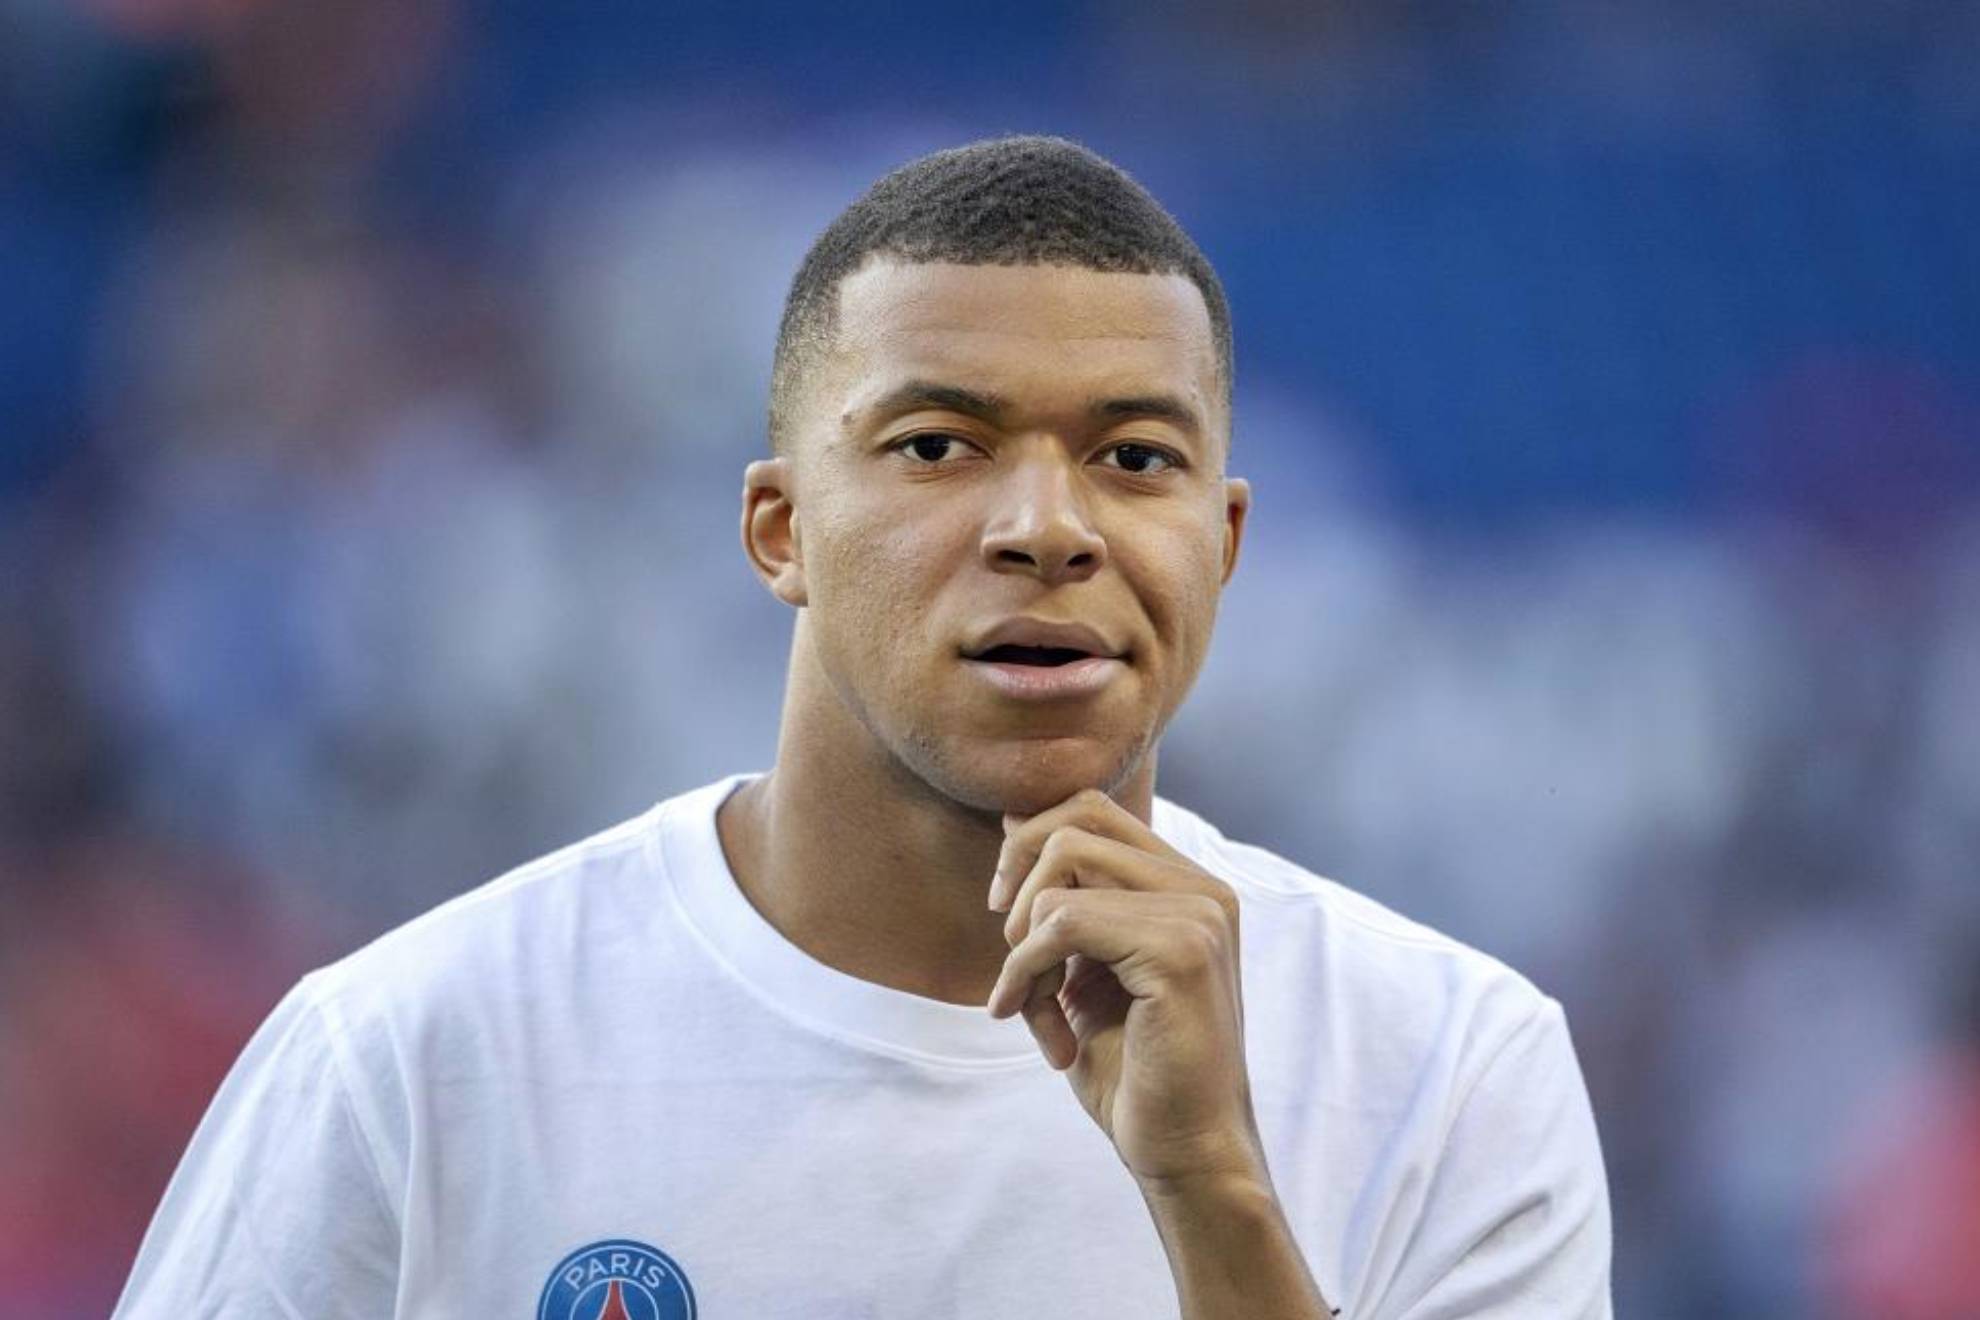 "I am the Boss here, okay" -- PSG Coach to Mbappe